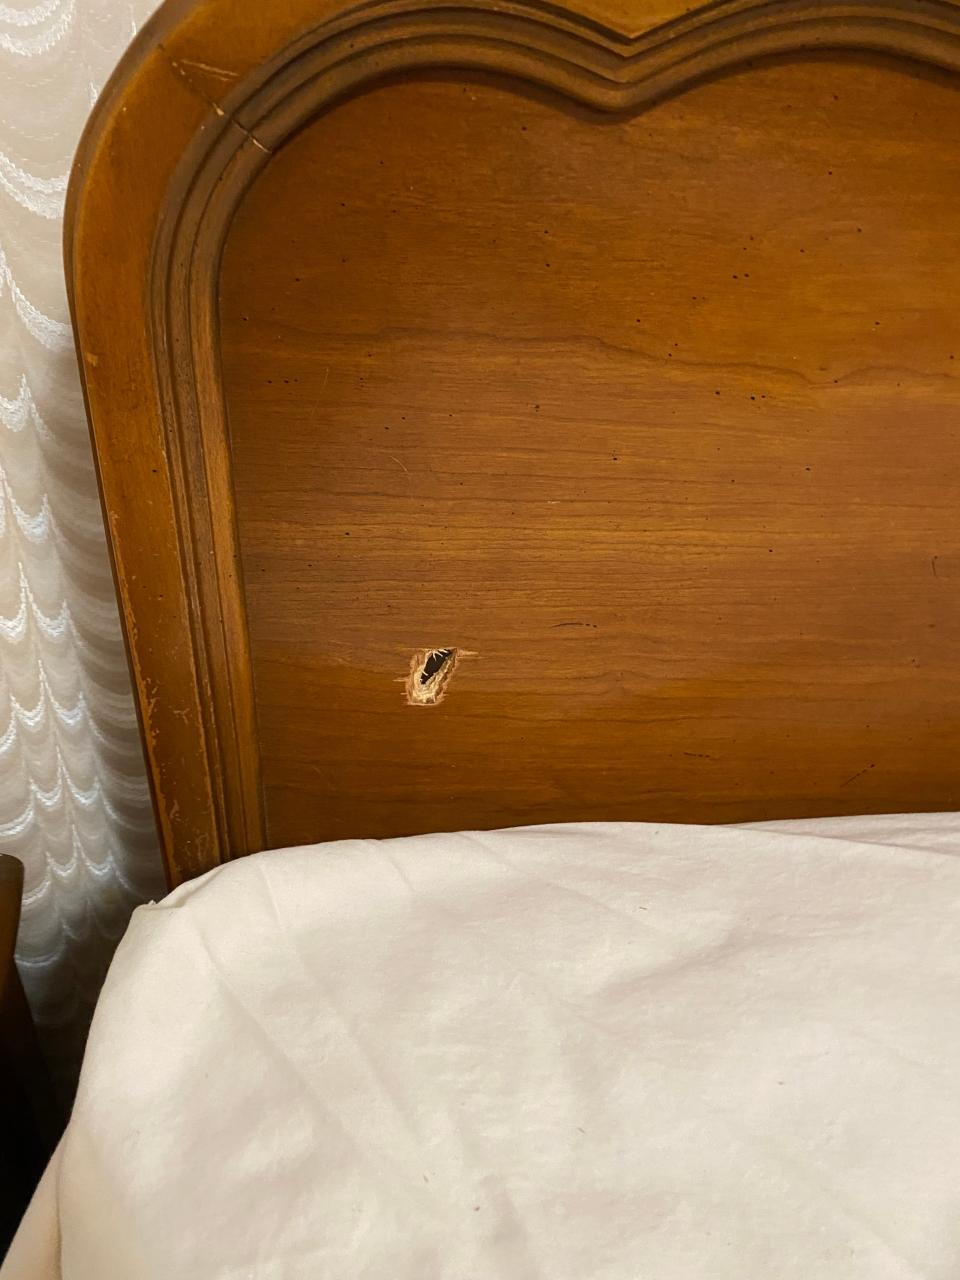 A bullet went through Helen Arnold Principal LaMonica Davis's mother's house in Akron on New Year's, slicing through the headboard of her bed.